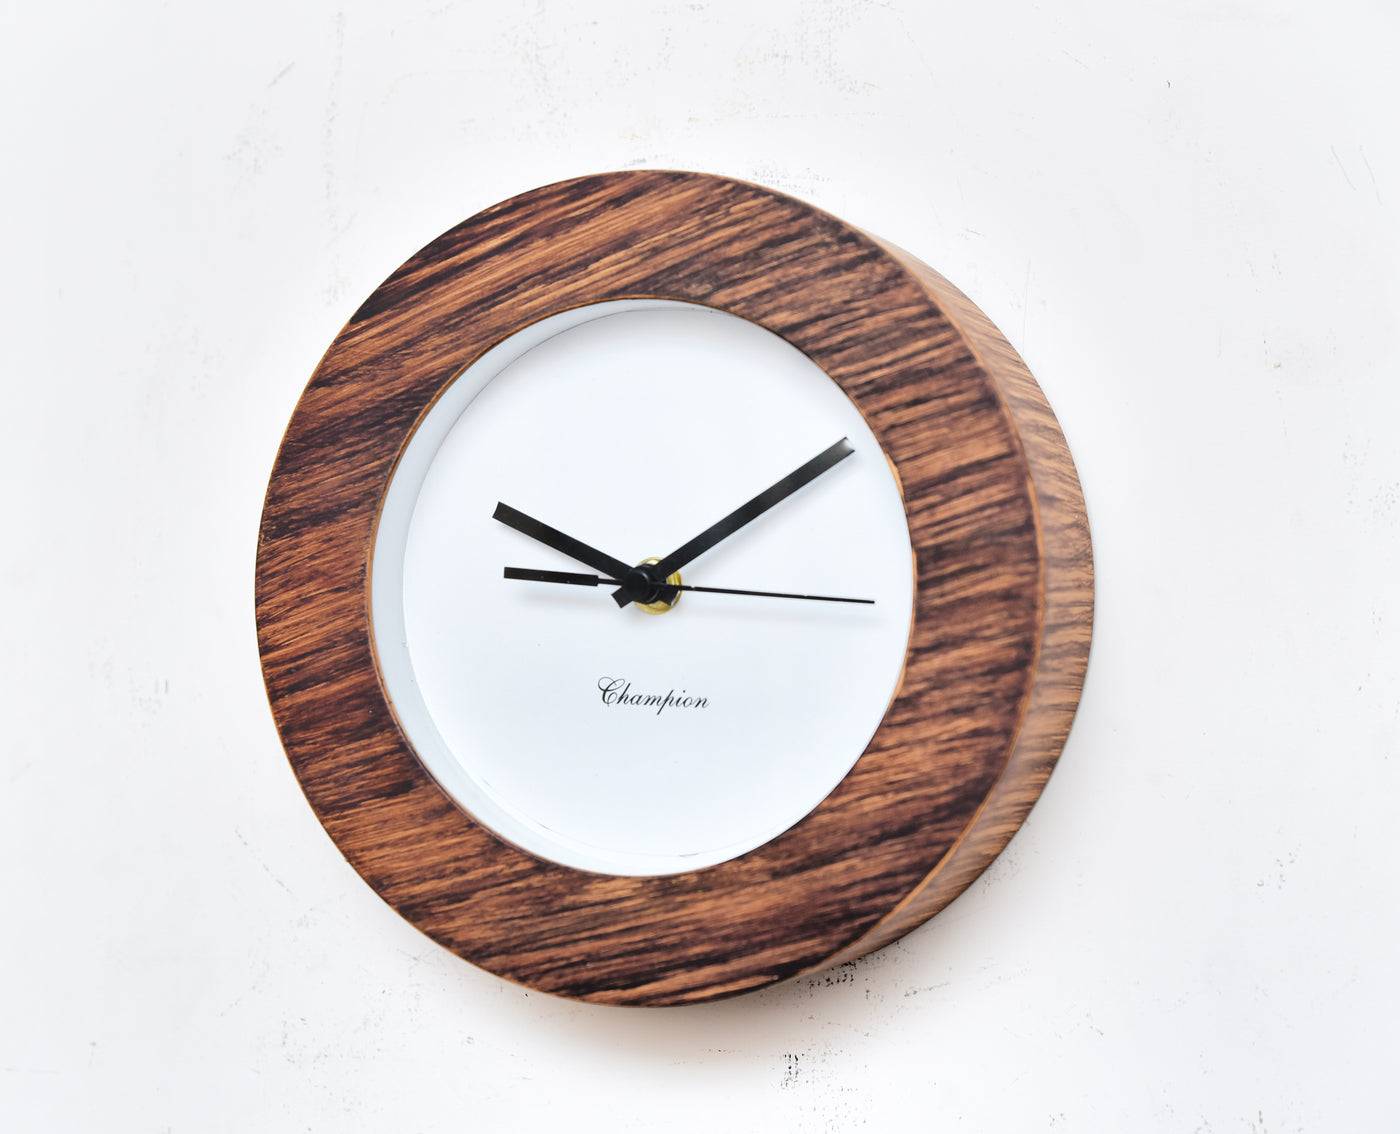 Champion White Dial Dark Ply-Wood Round Table Clock For Decor